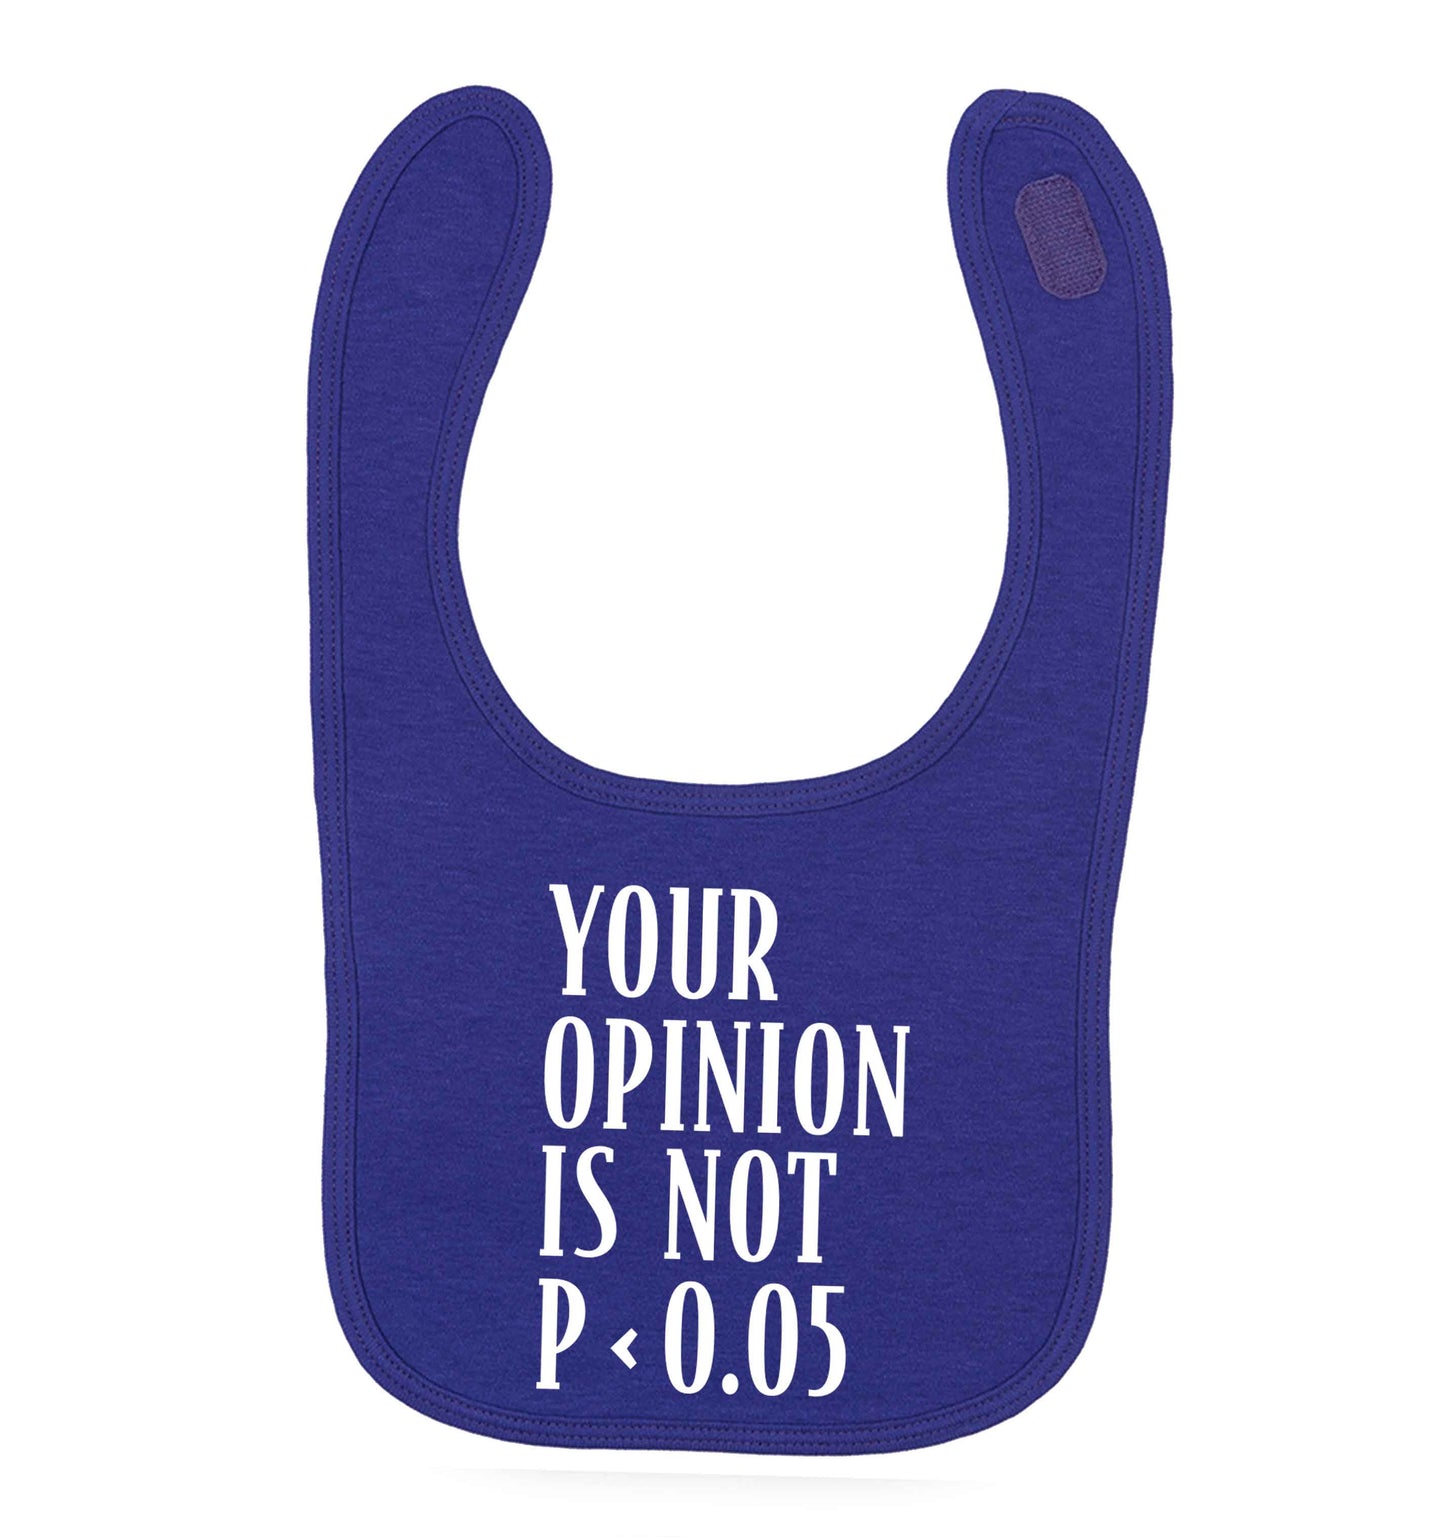 Your opinion is not P < 0.05purple baby bib